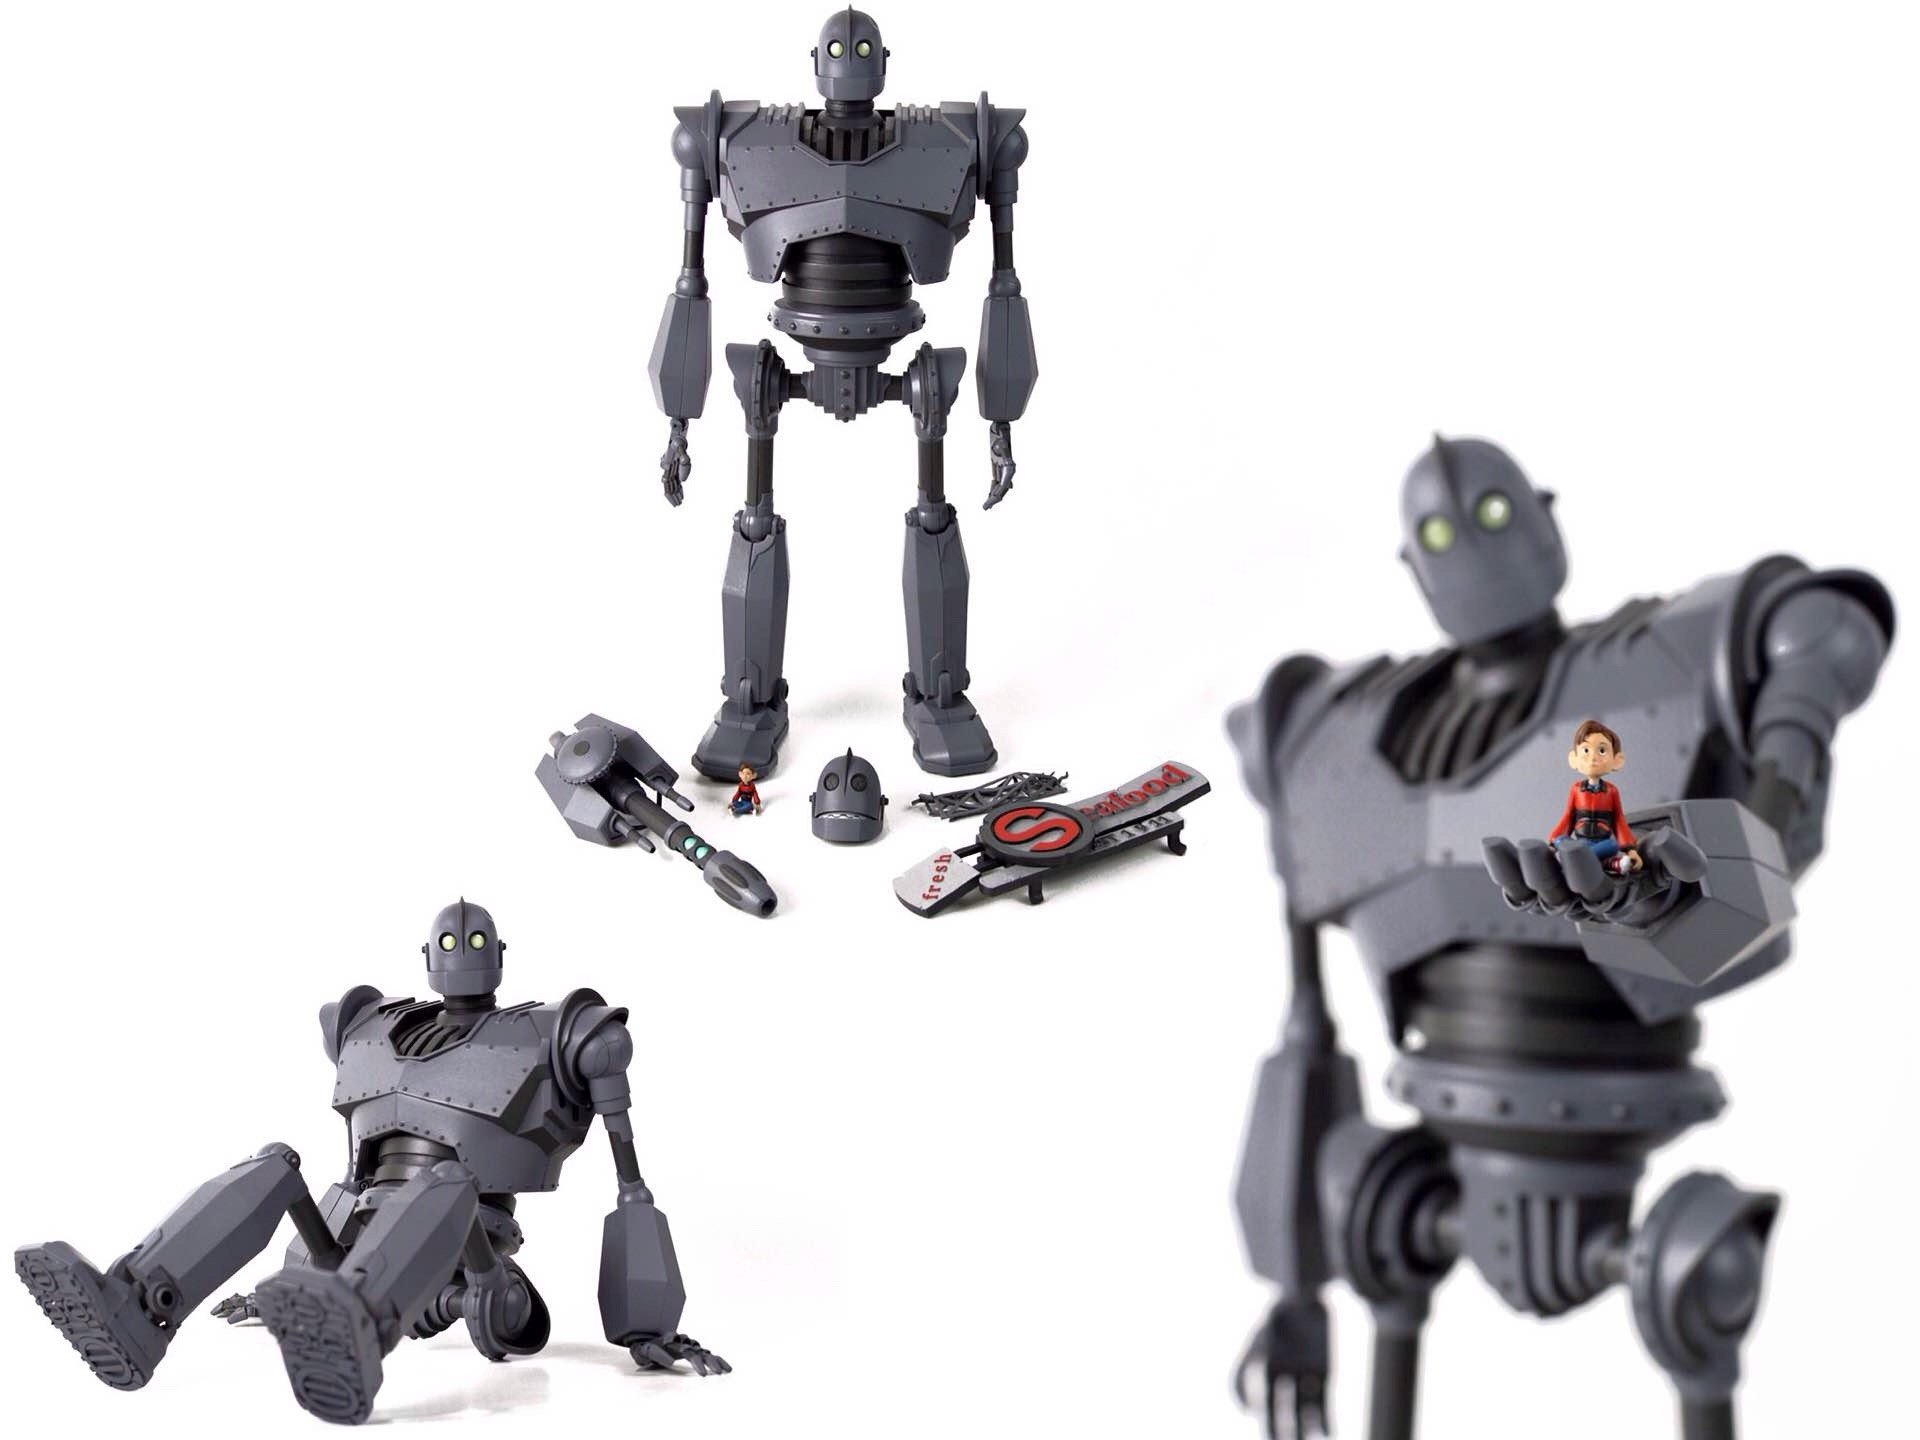 1920x1440 mondos-limited-edition-iron-giant-deluxe-figure